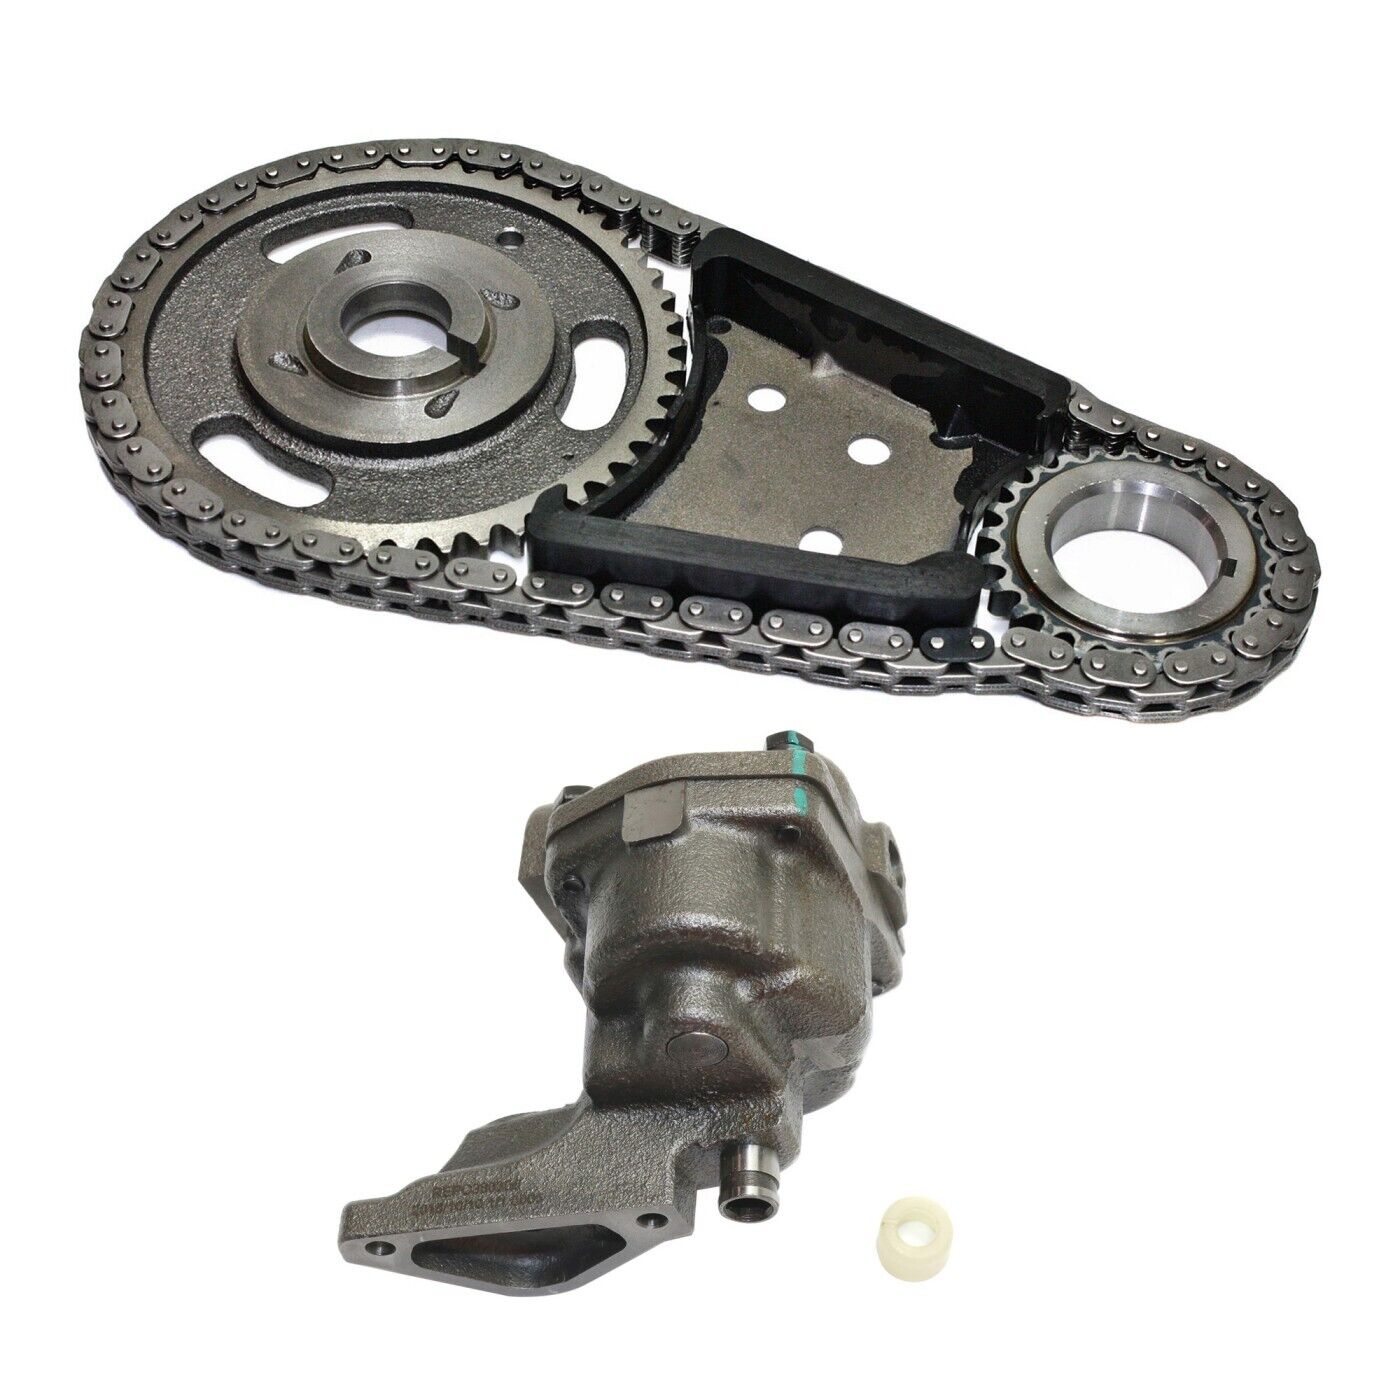 Timing Chain Kit For 2000-2005 Chevrolet Impala With Oil Pump and Sprocket Gear